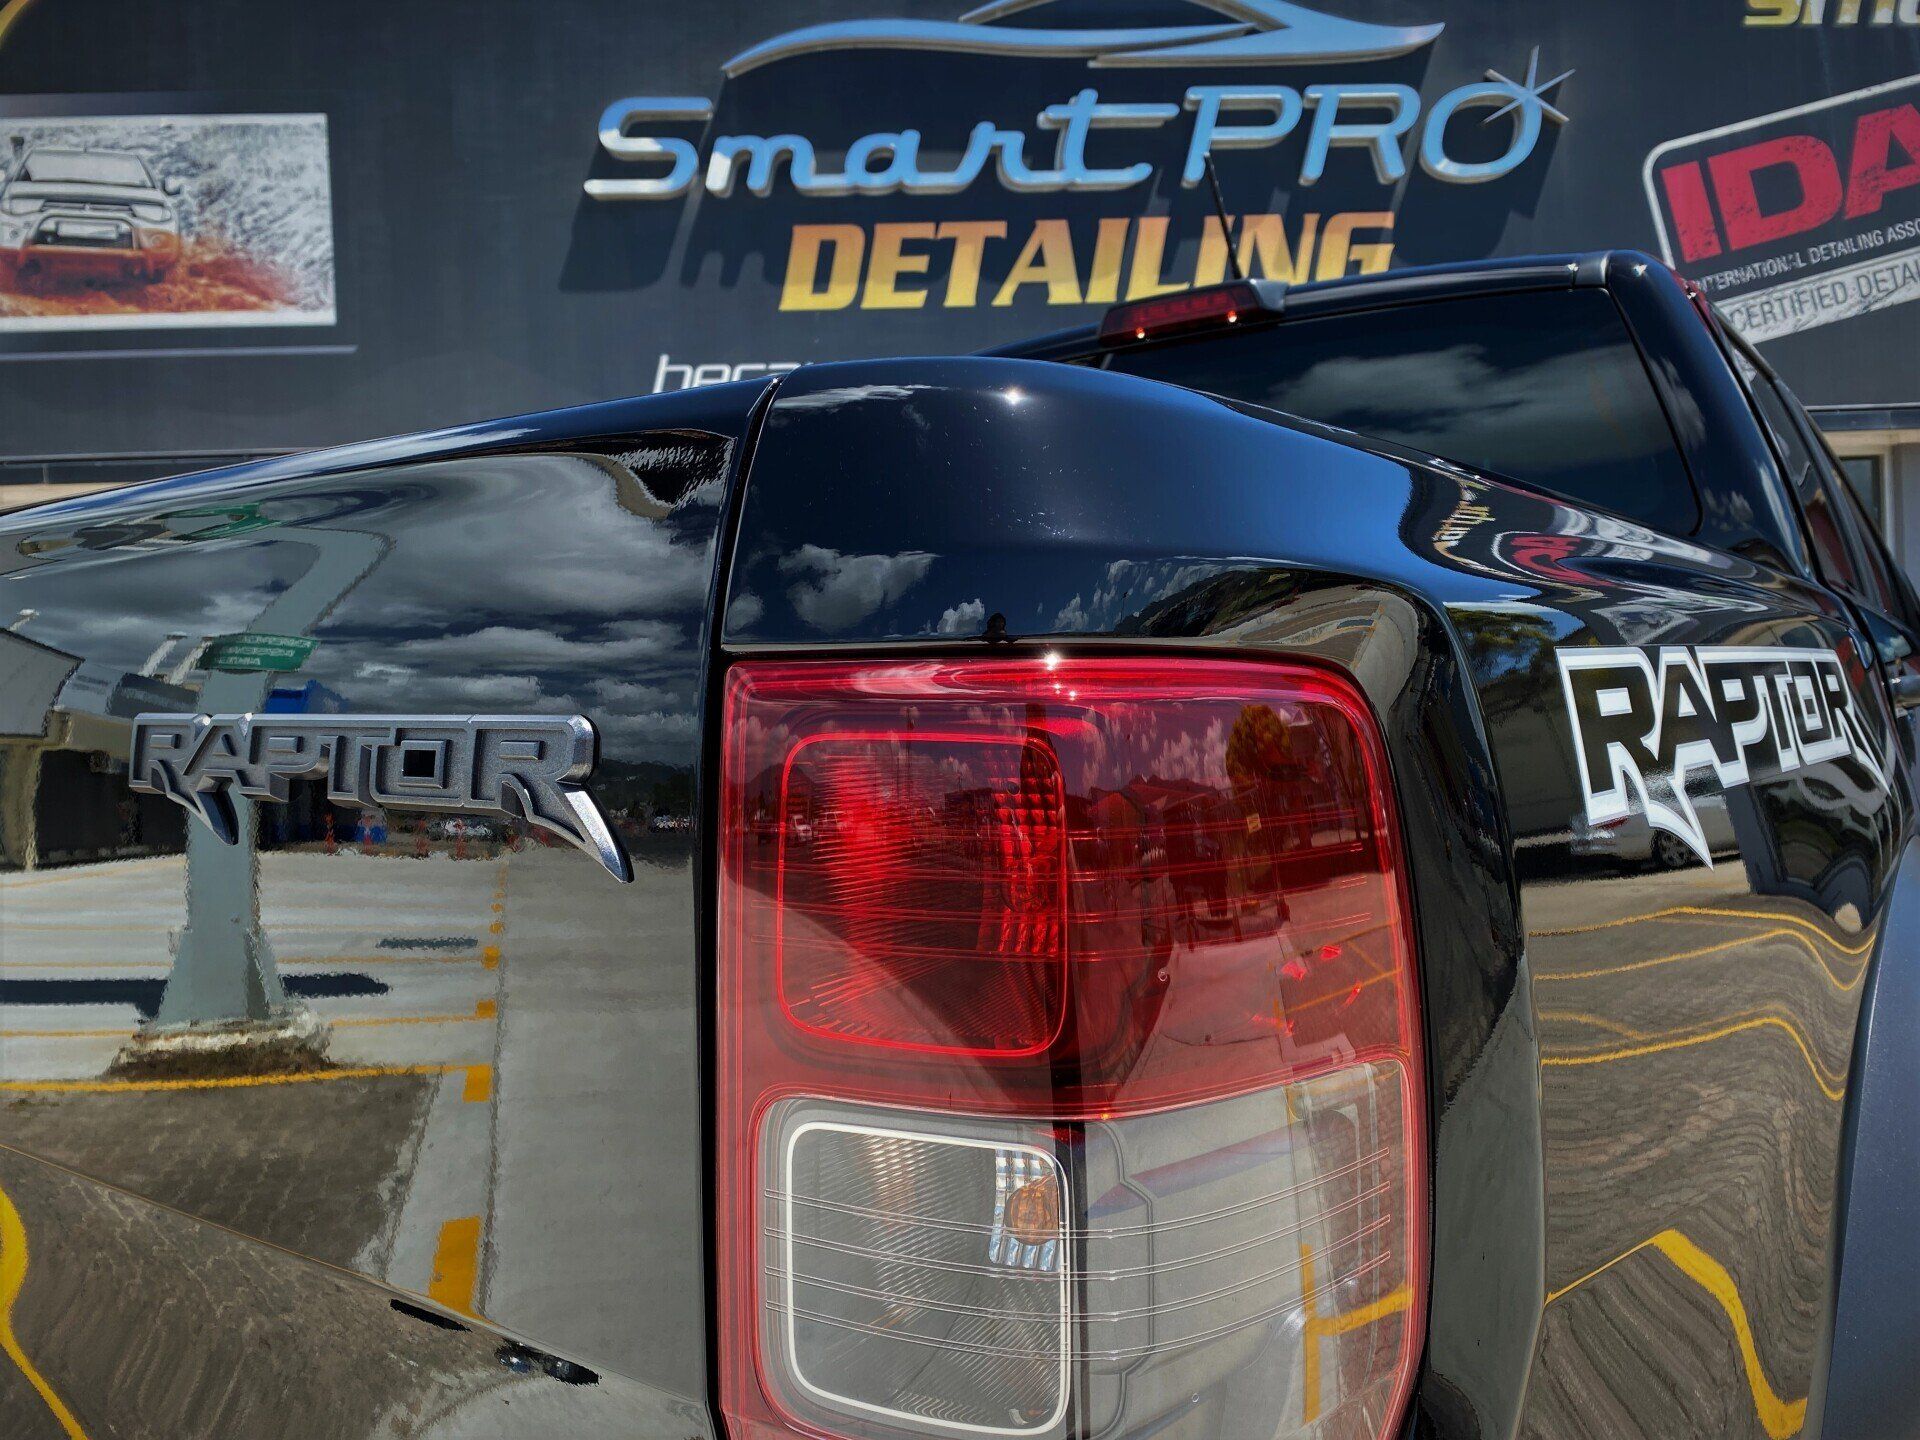 Full Detail 4x4 — Smart Pro Detailing in Portsmith, QLD